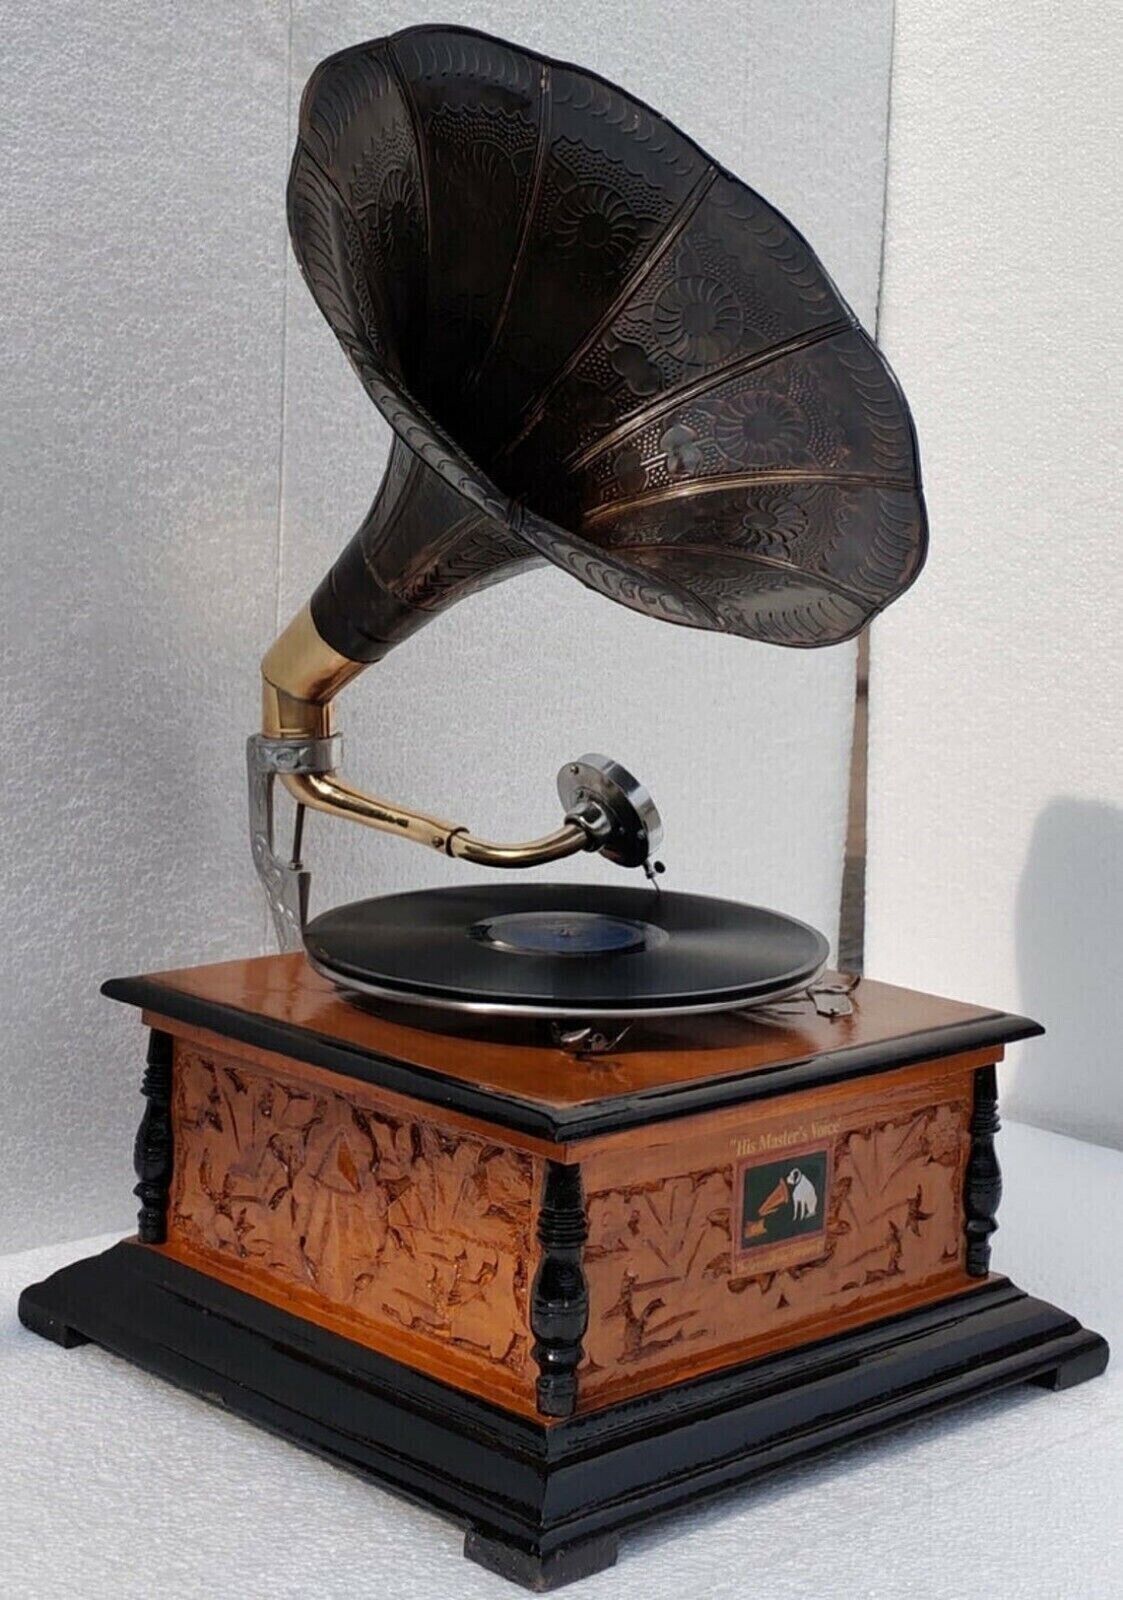 Antique Gramophone Fully Working Phonograph, win-up record player Phonograph